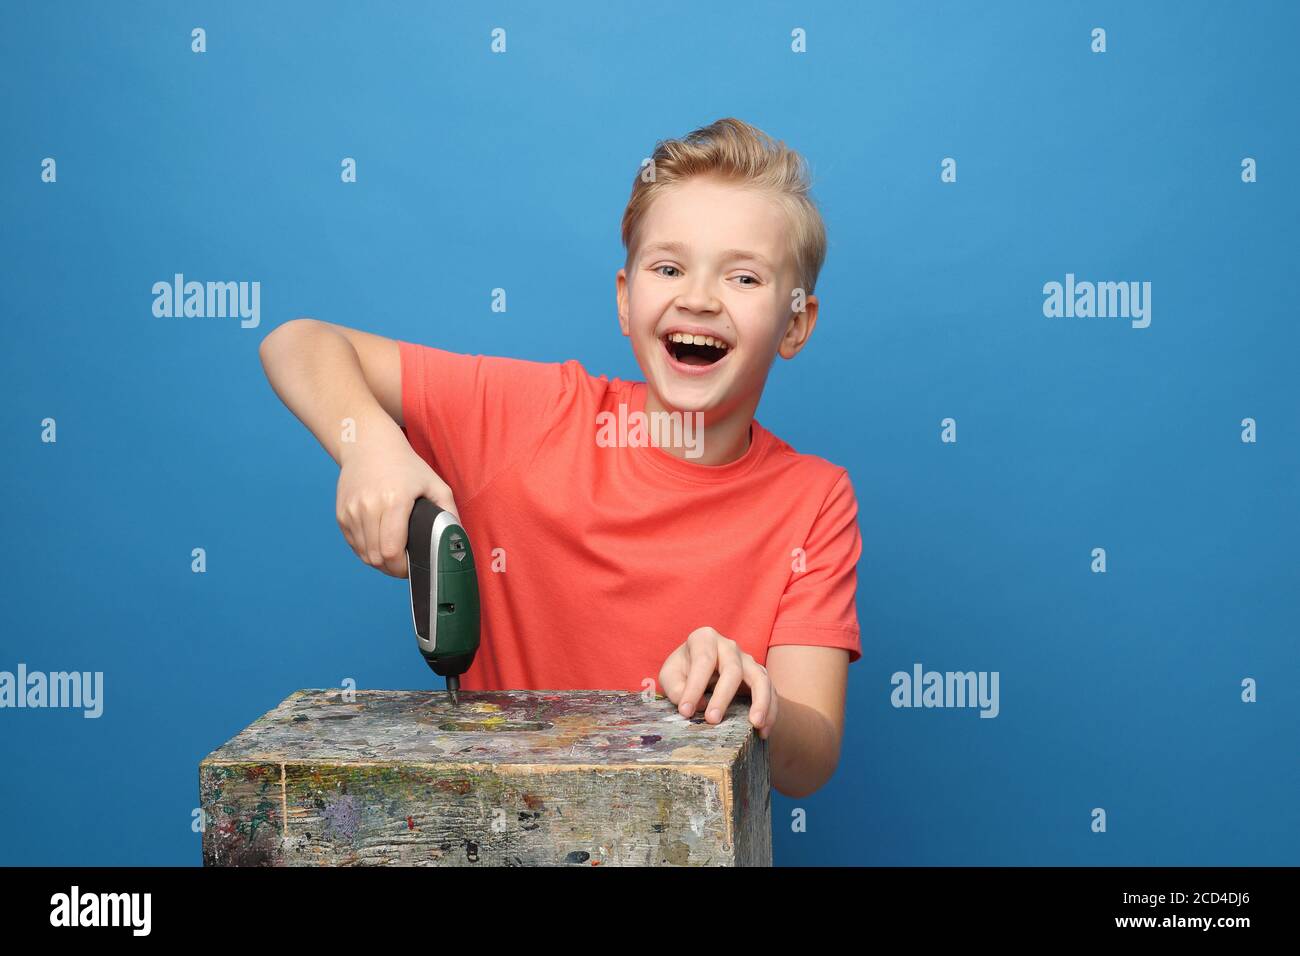 Child joy, play with DIY tools. The child plays with a screwdriver. Portrait of a boy on a blue background. Stock Photo